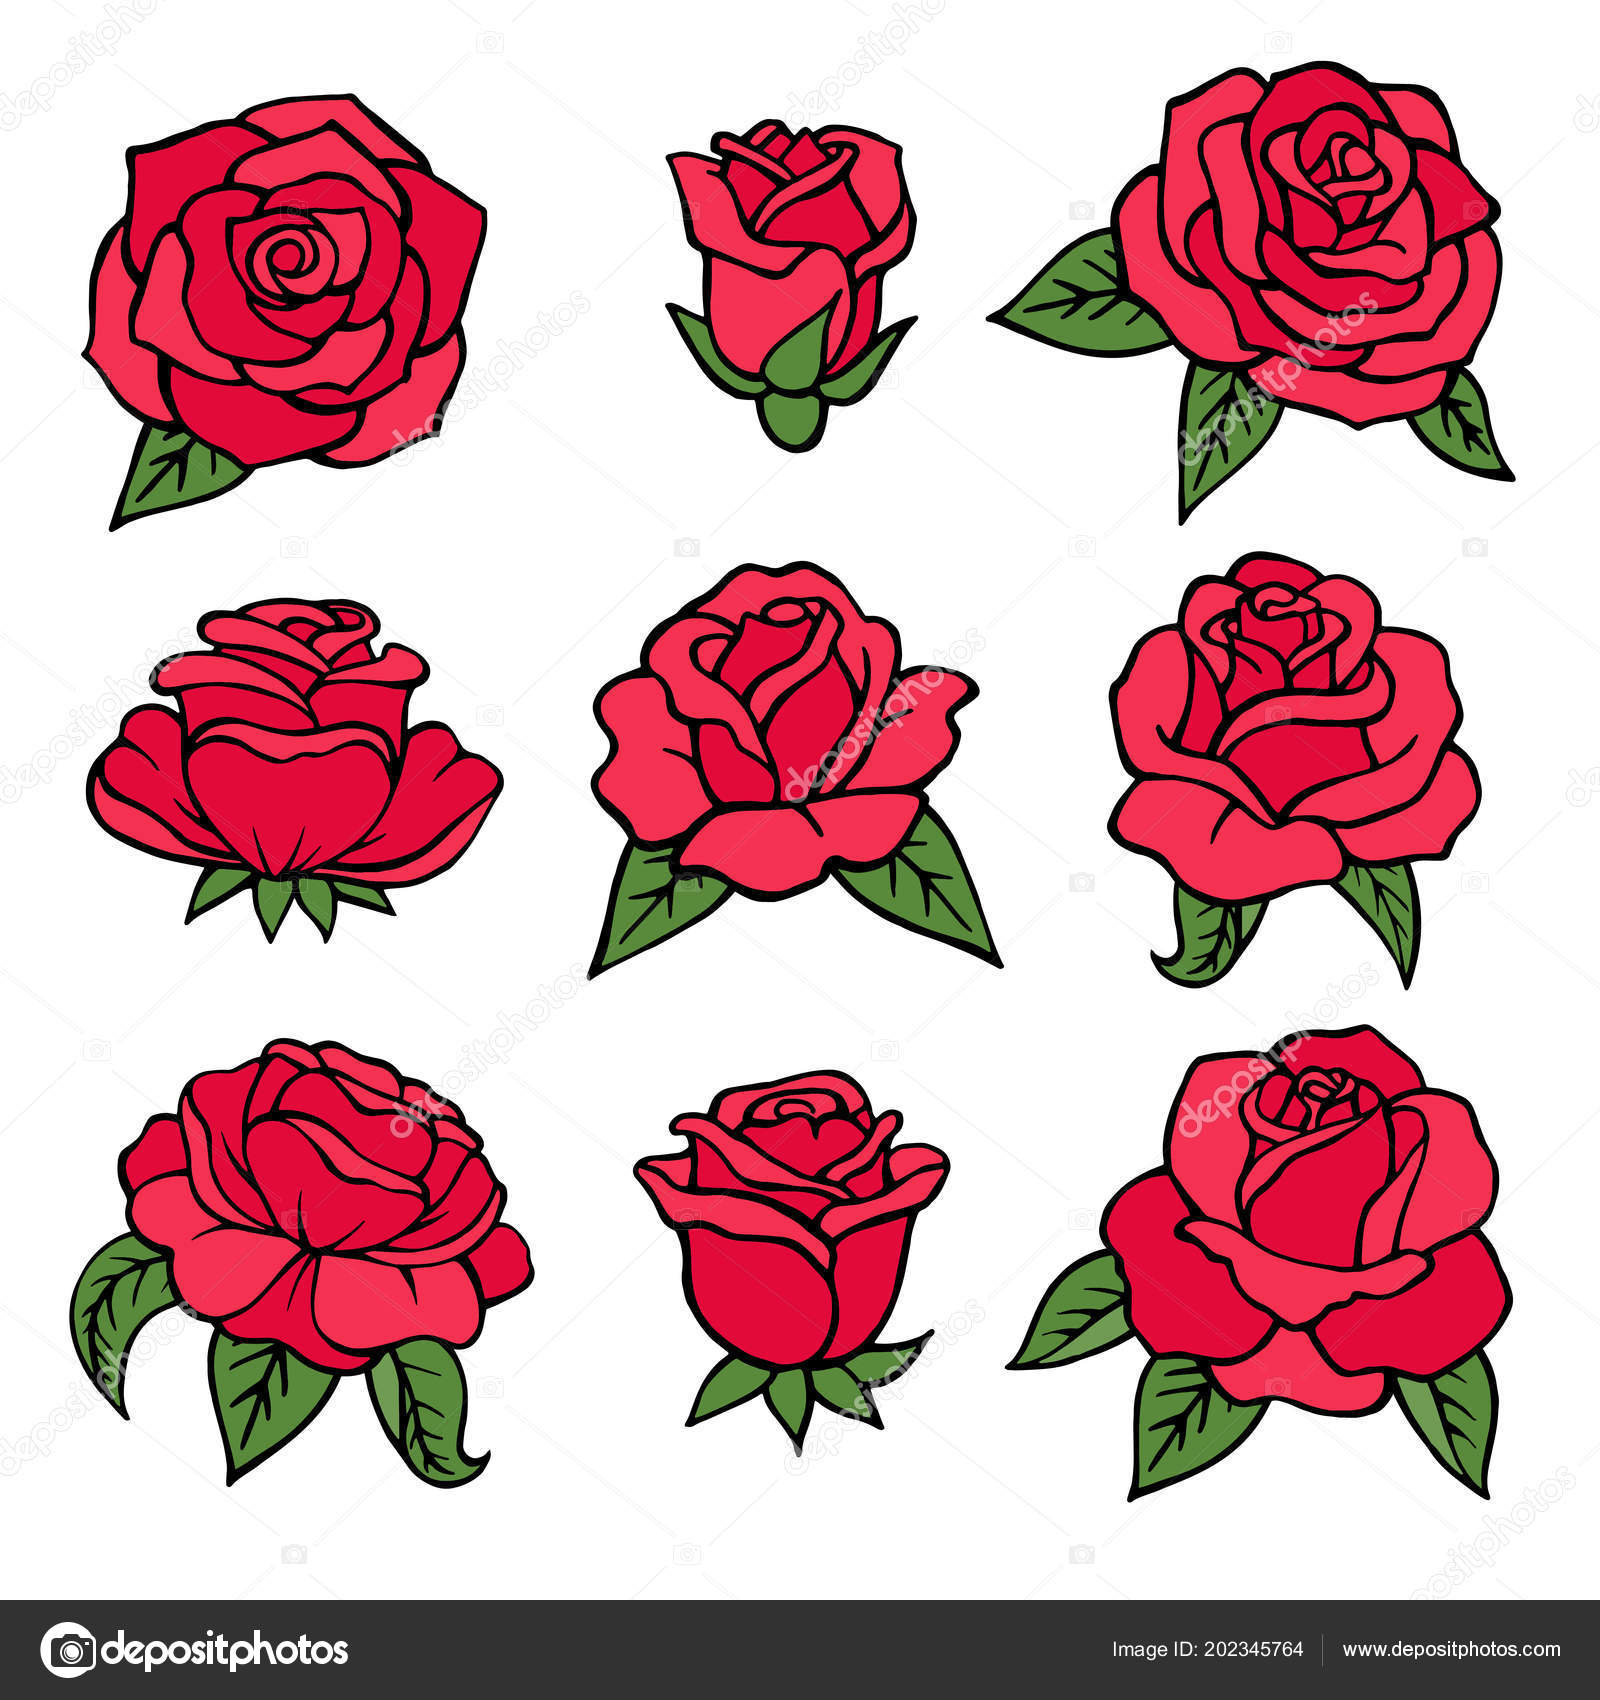 Illustrations Of Plants Red Roses Symbols Of Love Wedding Flowers Isolate On White Stock Vector C Onyxprj